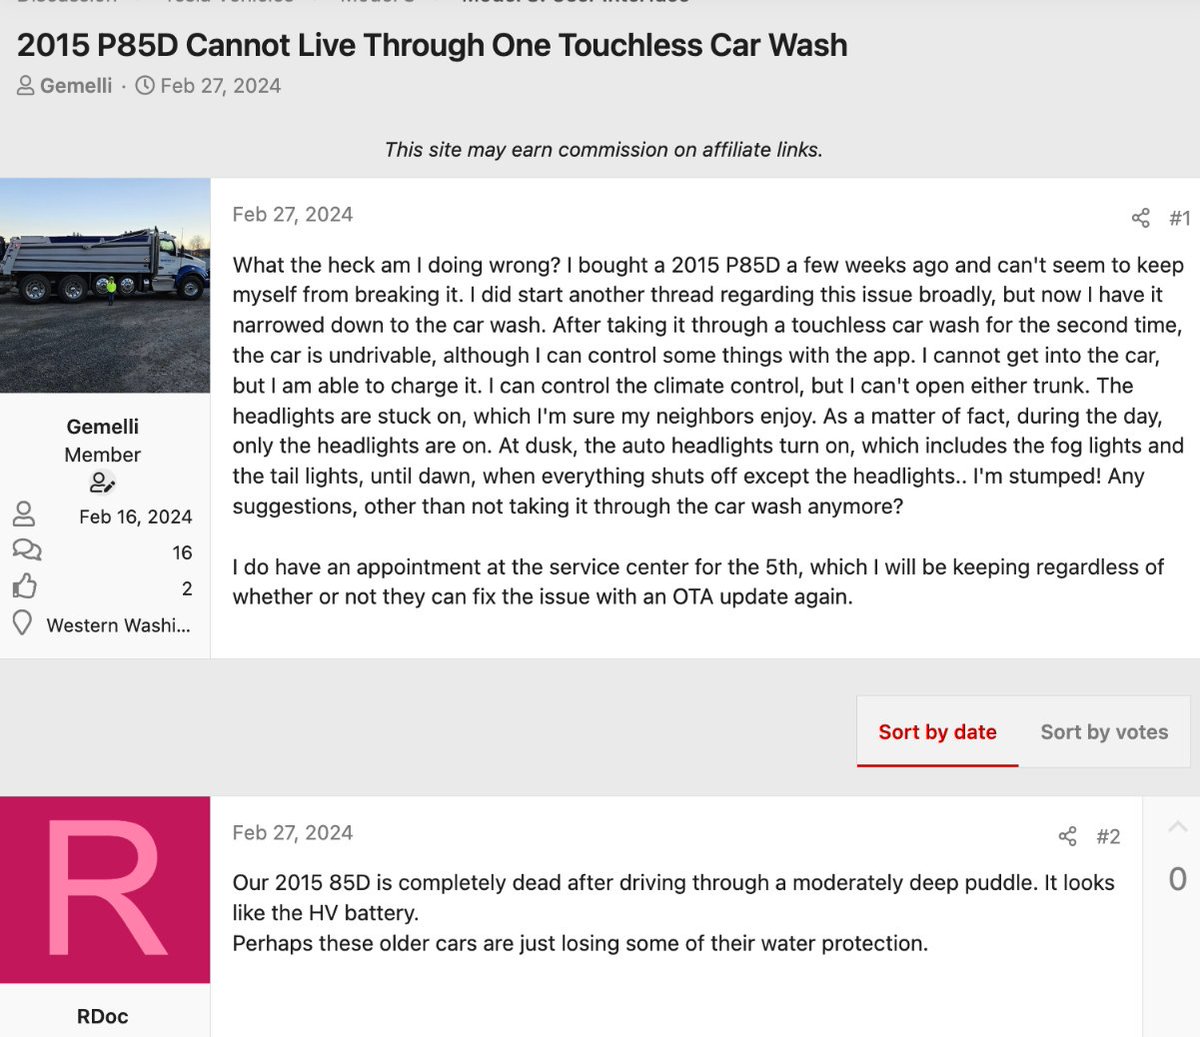 Even touchless car washes can disable a Tesla
teslamotorsclub.com/tmc/threads/20…